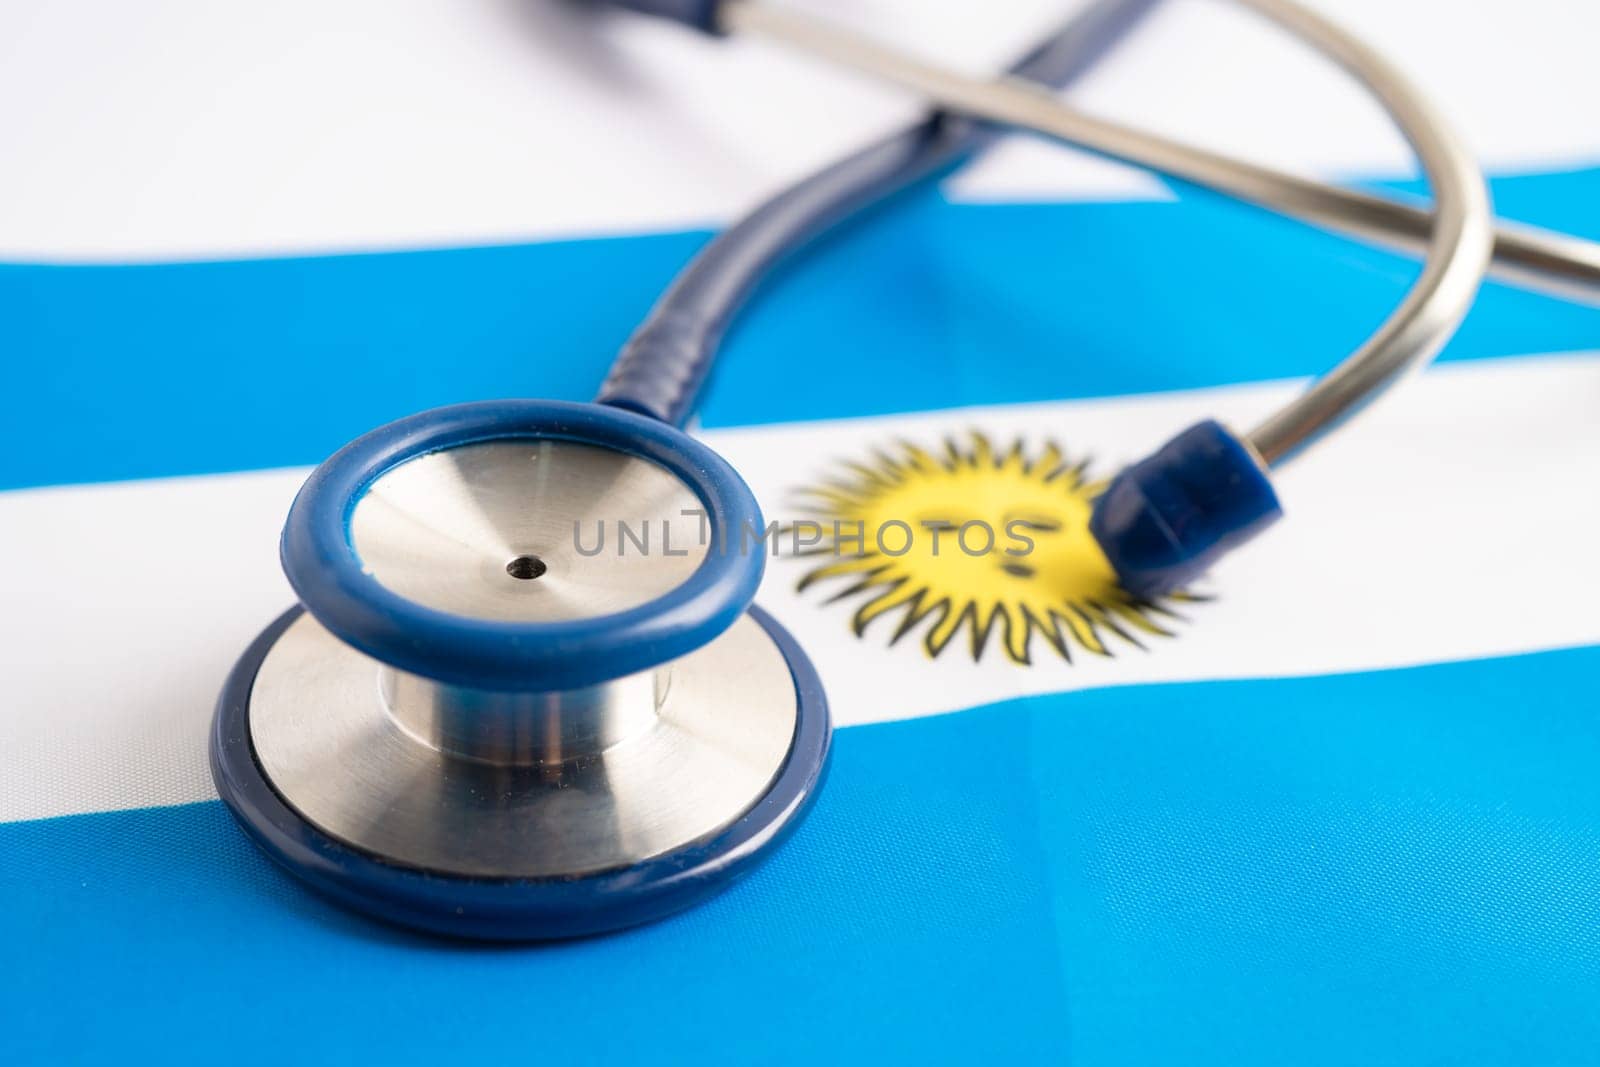 Stethoscope on Argentina flag background, Business and finance concept.